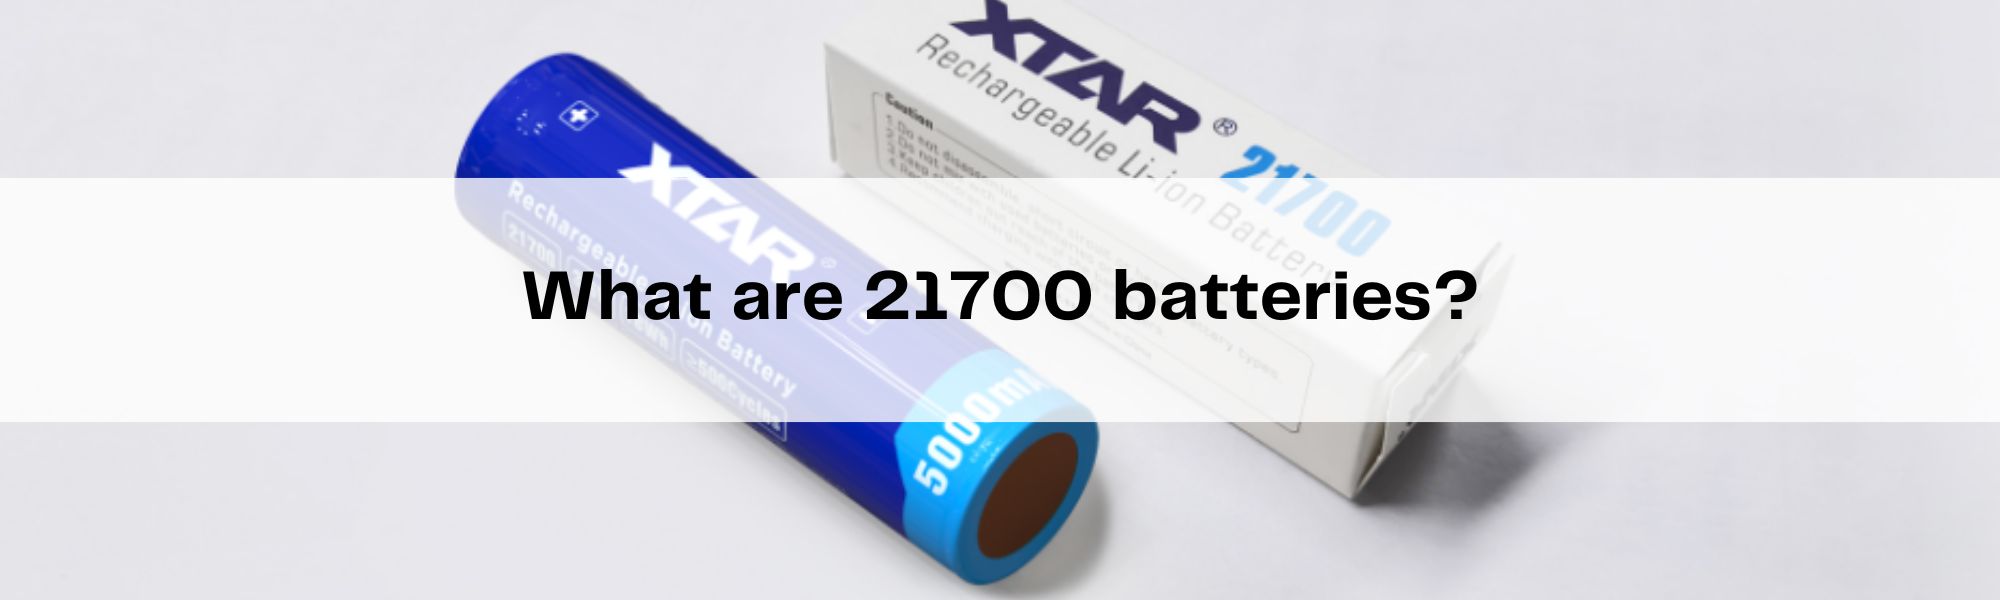 what are 21700 batteries?